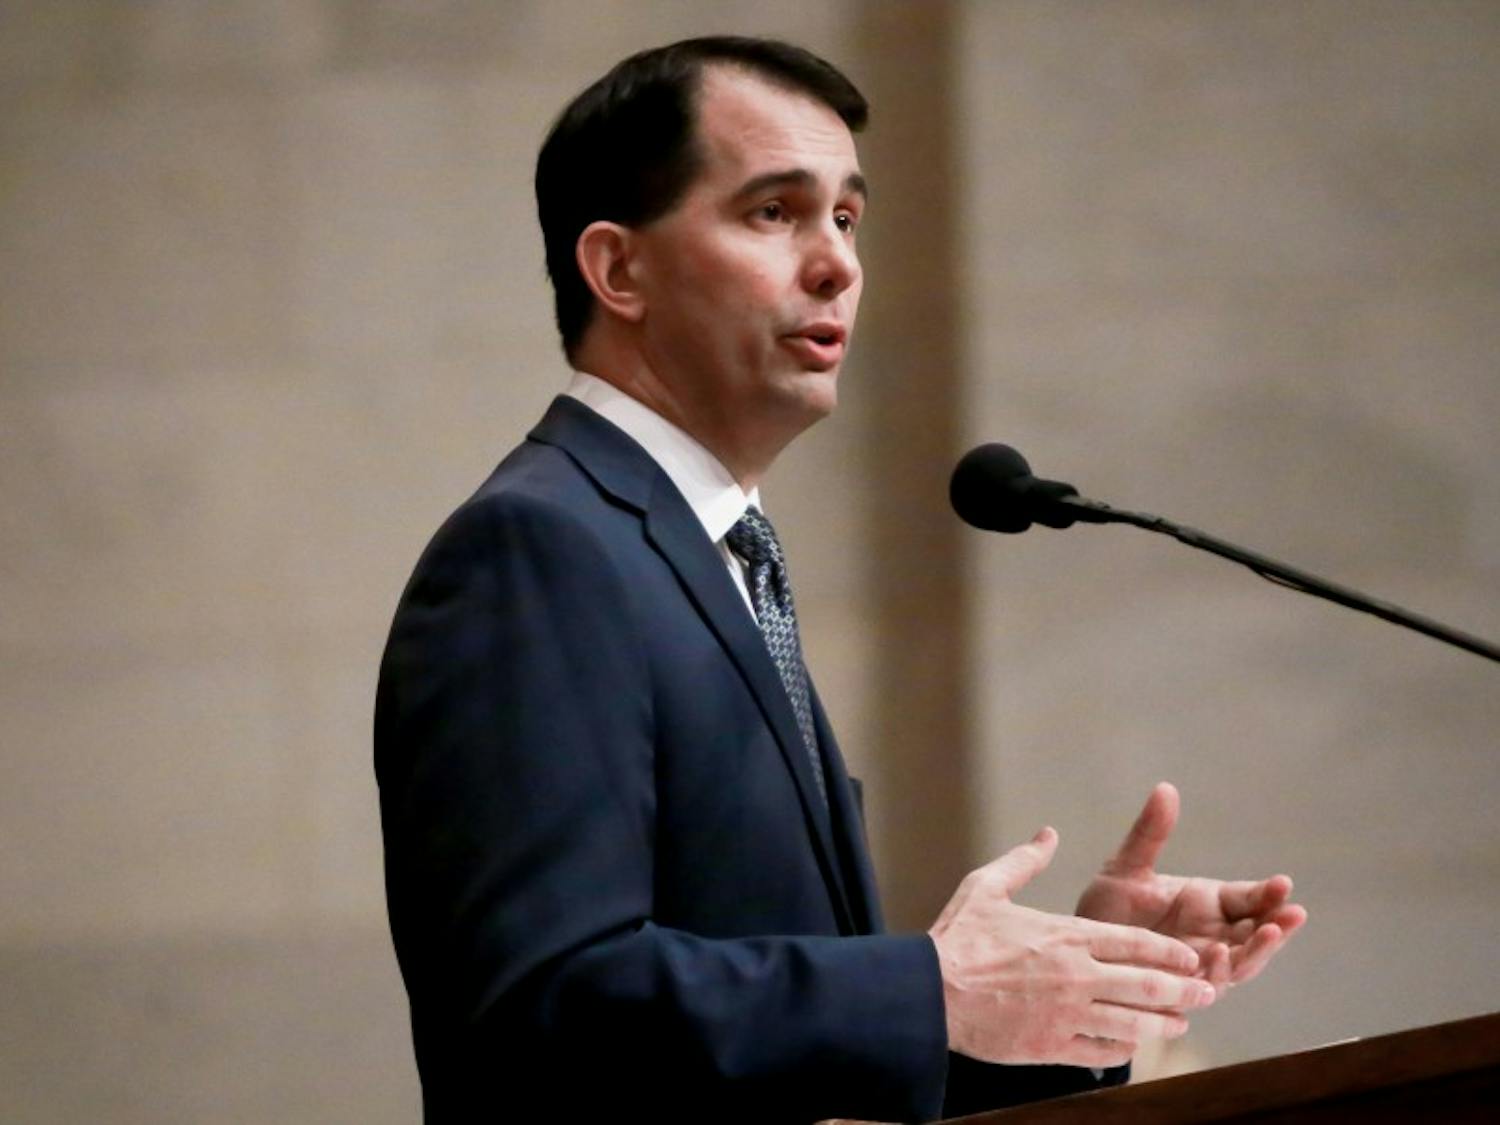 Gov. Scott Walker, who has not said whether he supports the Republicans health care overhaul bill, said Wednesday that future Medicaid reforms are promising.